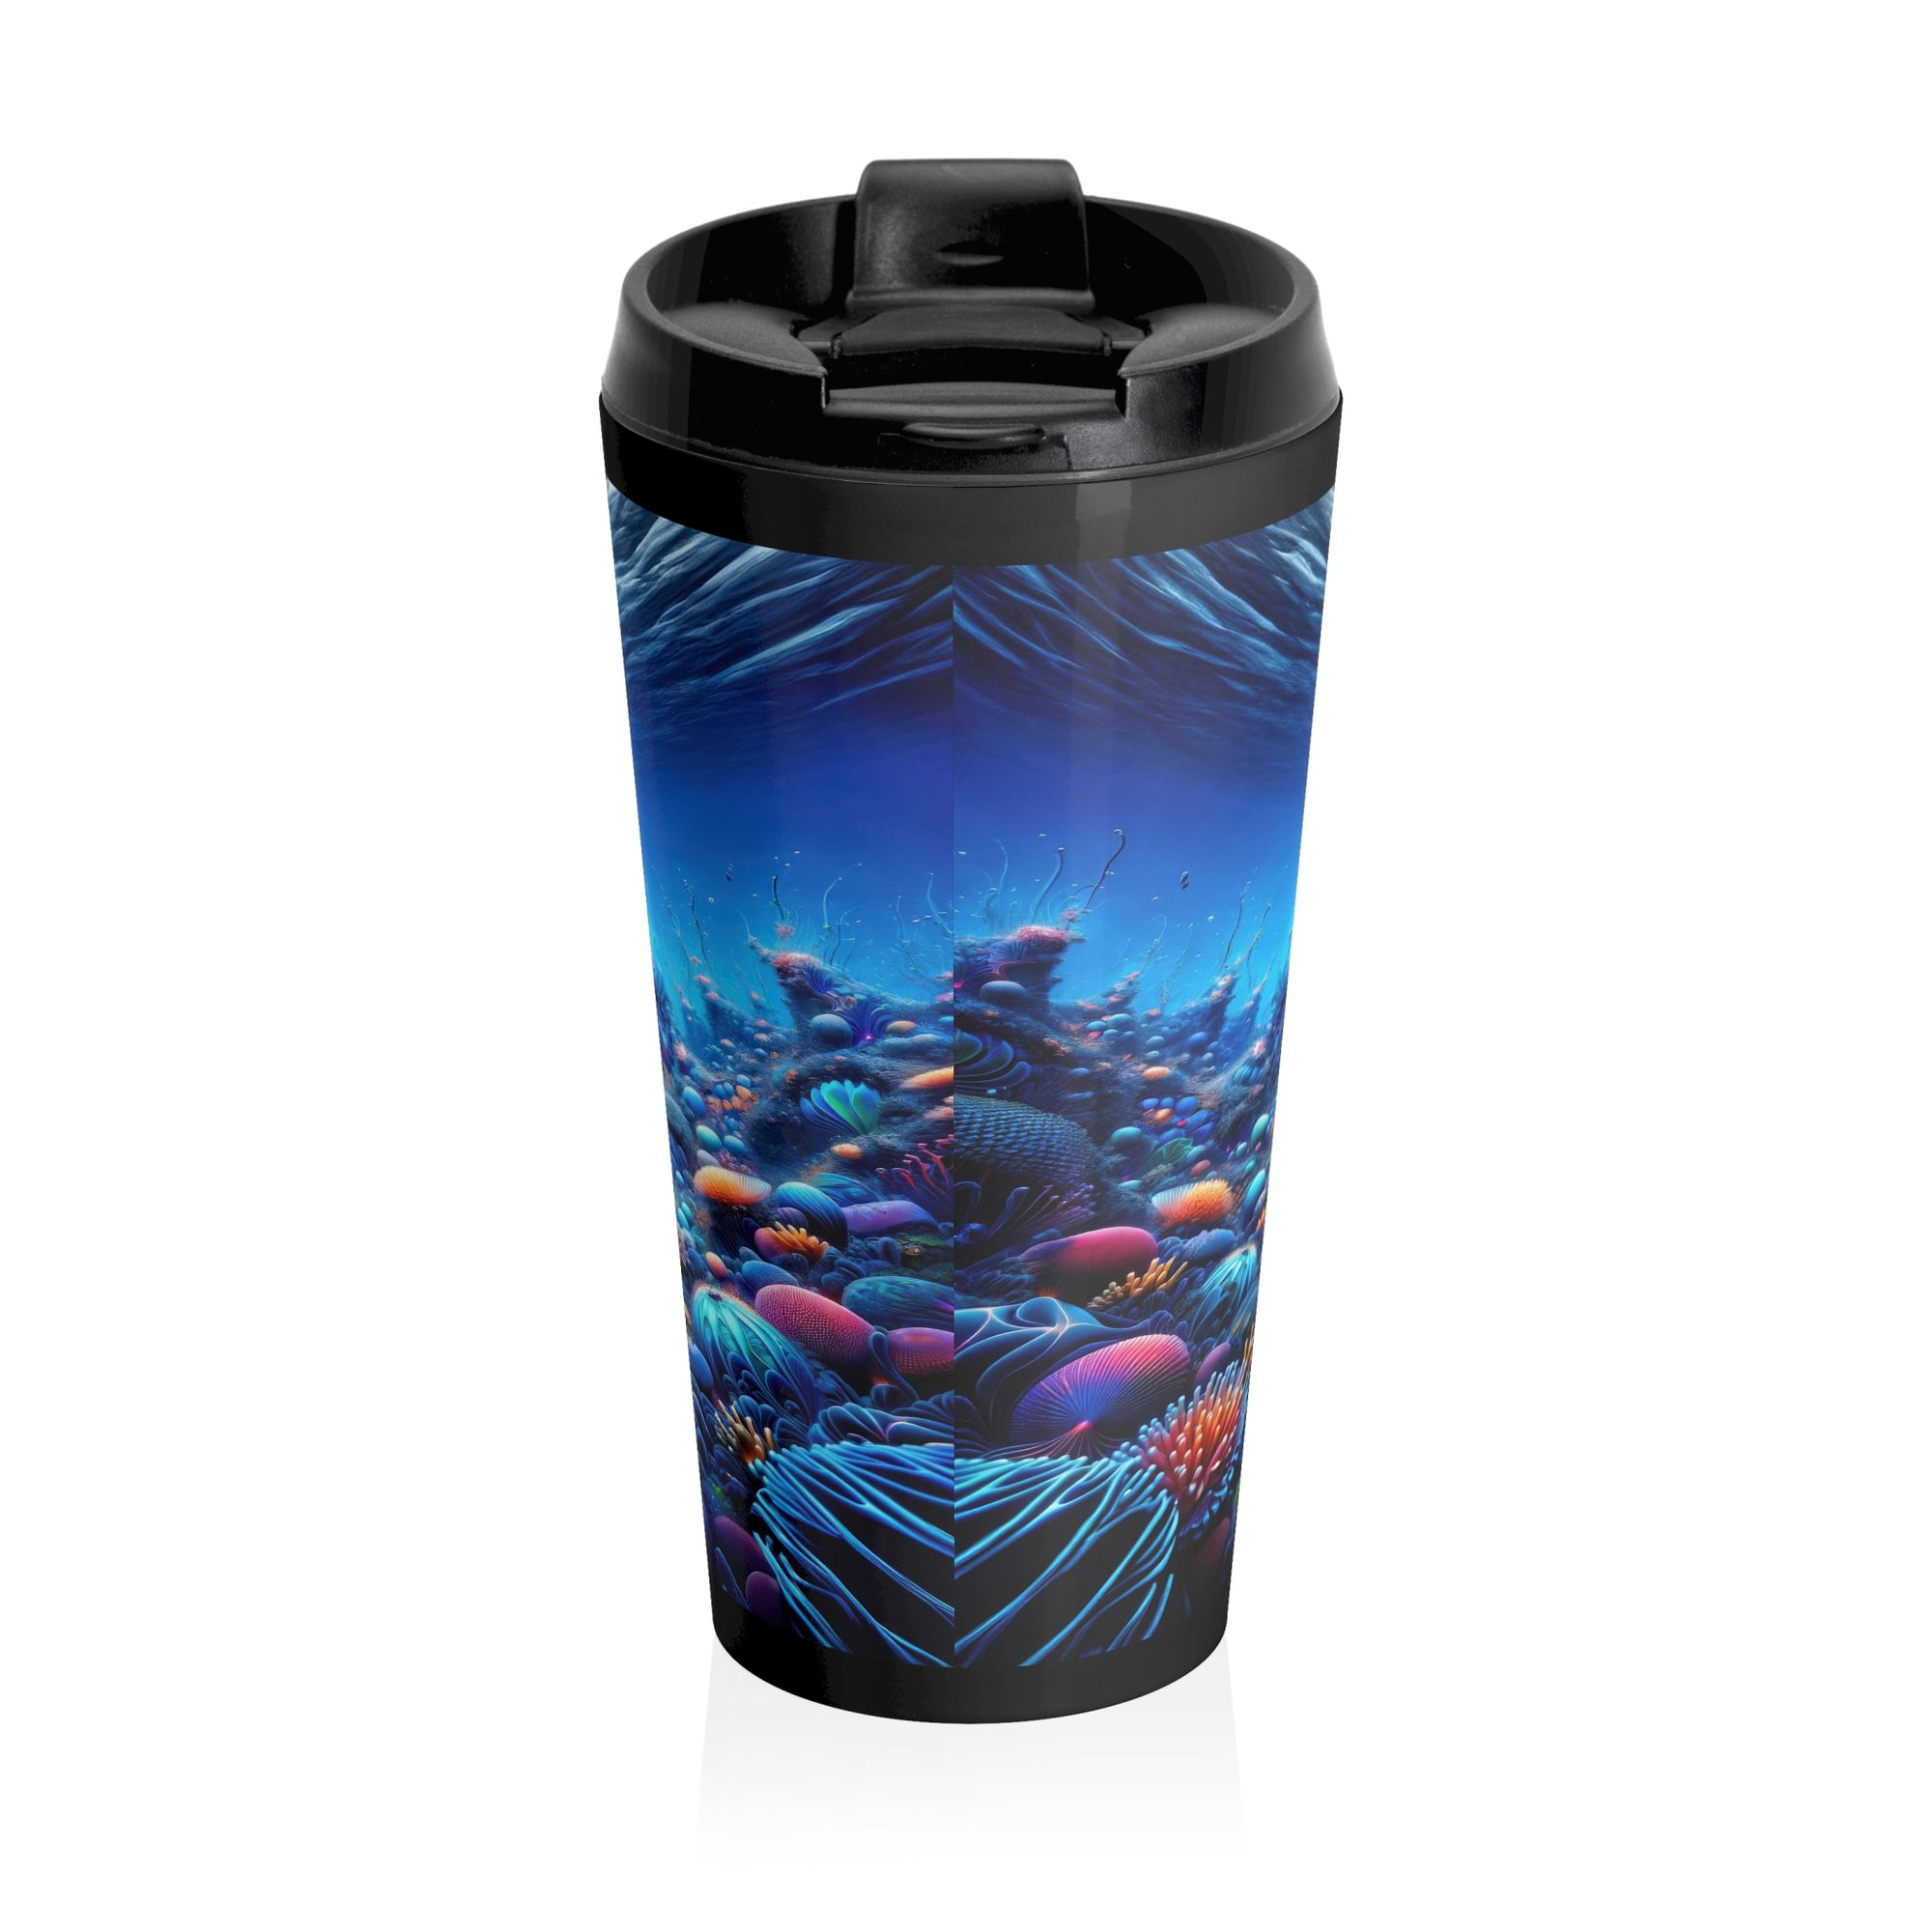 Whispers of the Whorled Waters Travel Mug